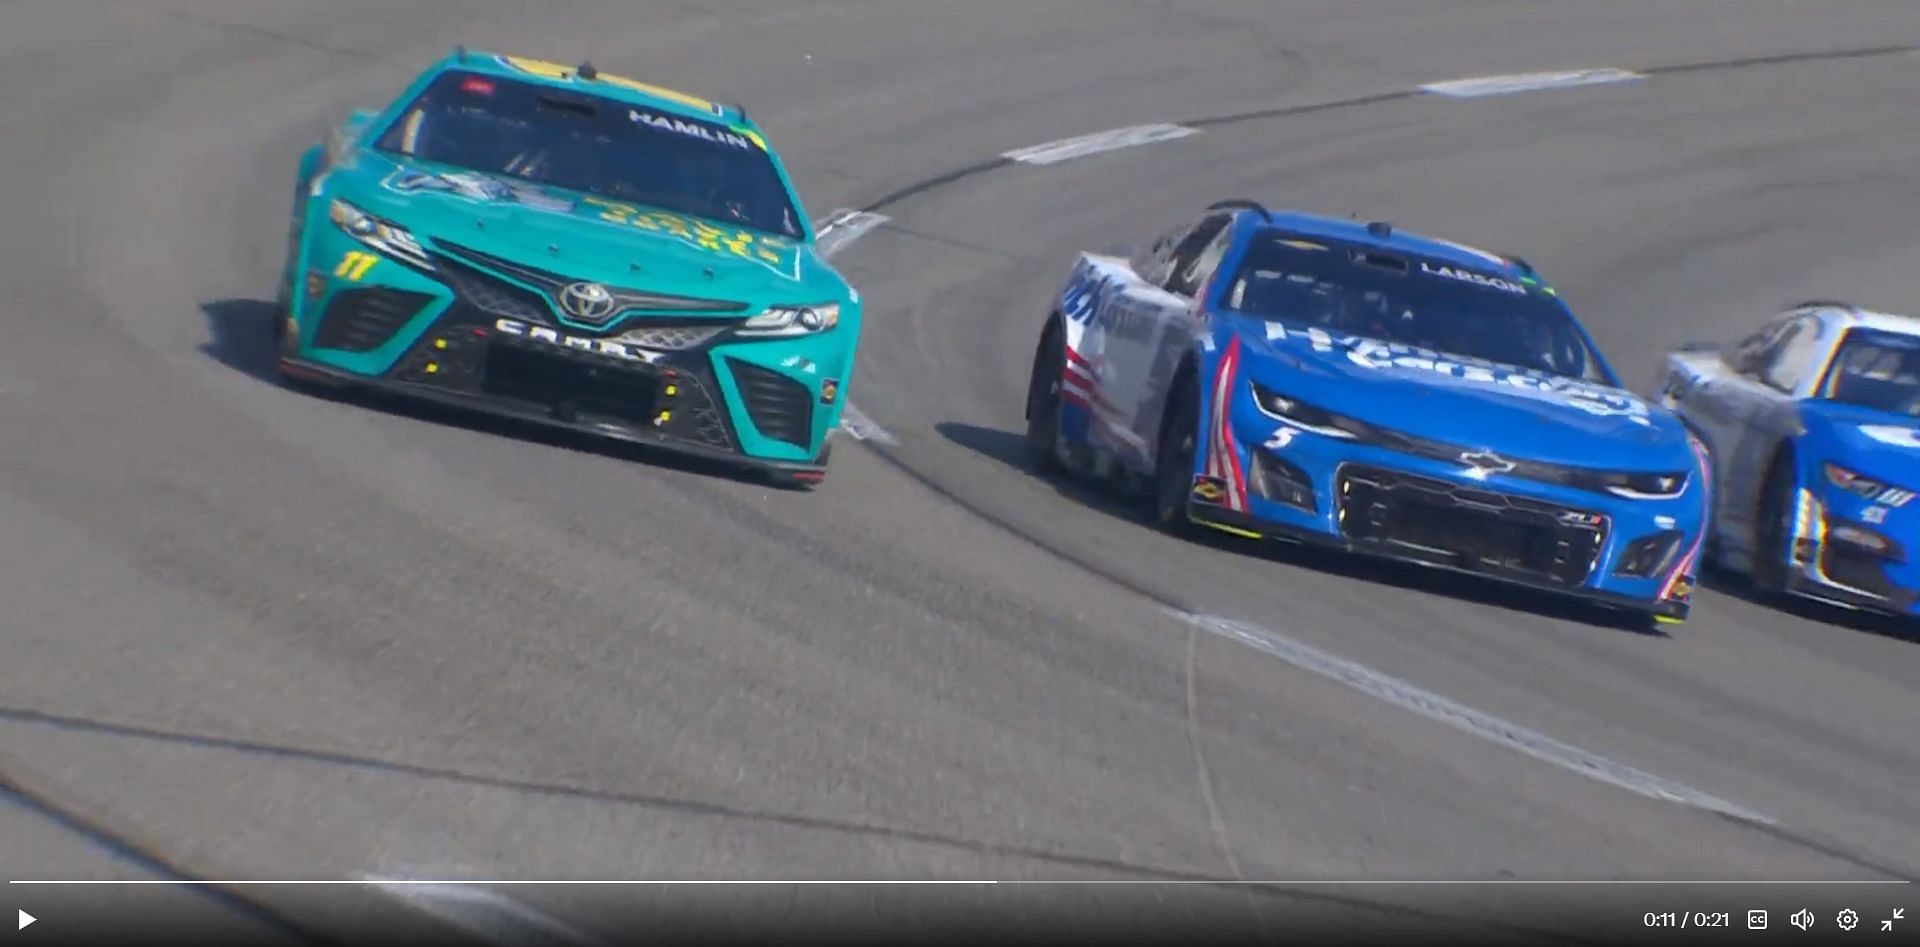 (L-R) Denny Hamlin (#11) and Kyle Larson (#5) race each other during the NASCAR Cup Series 